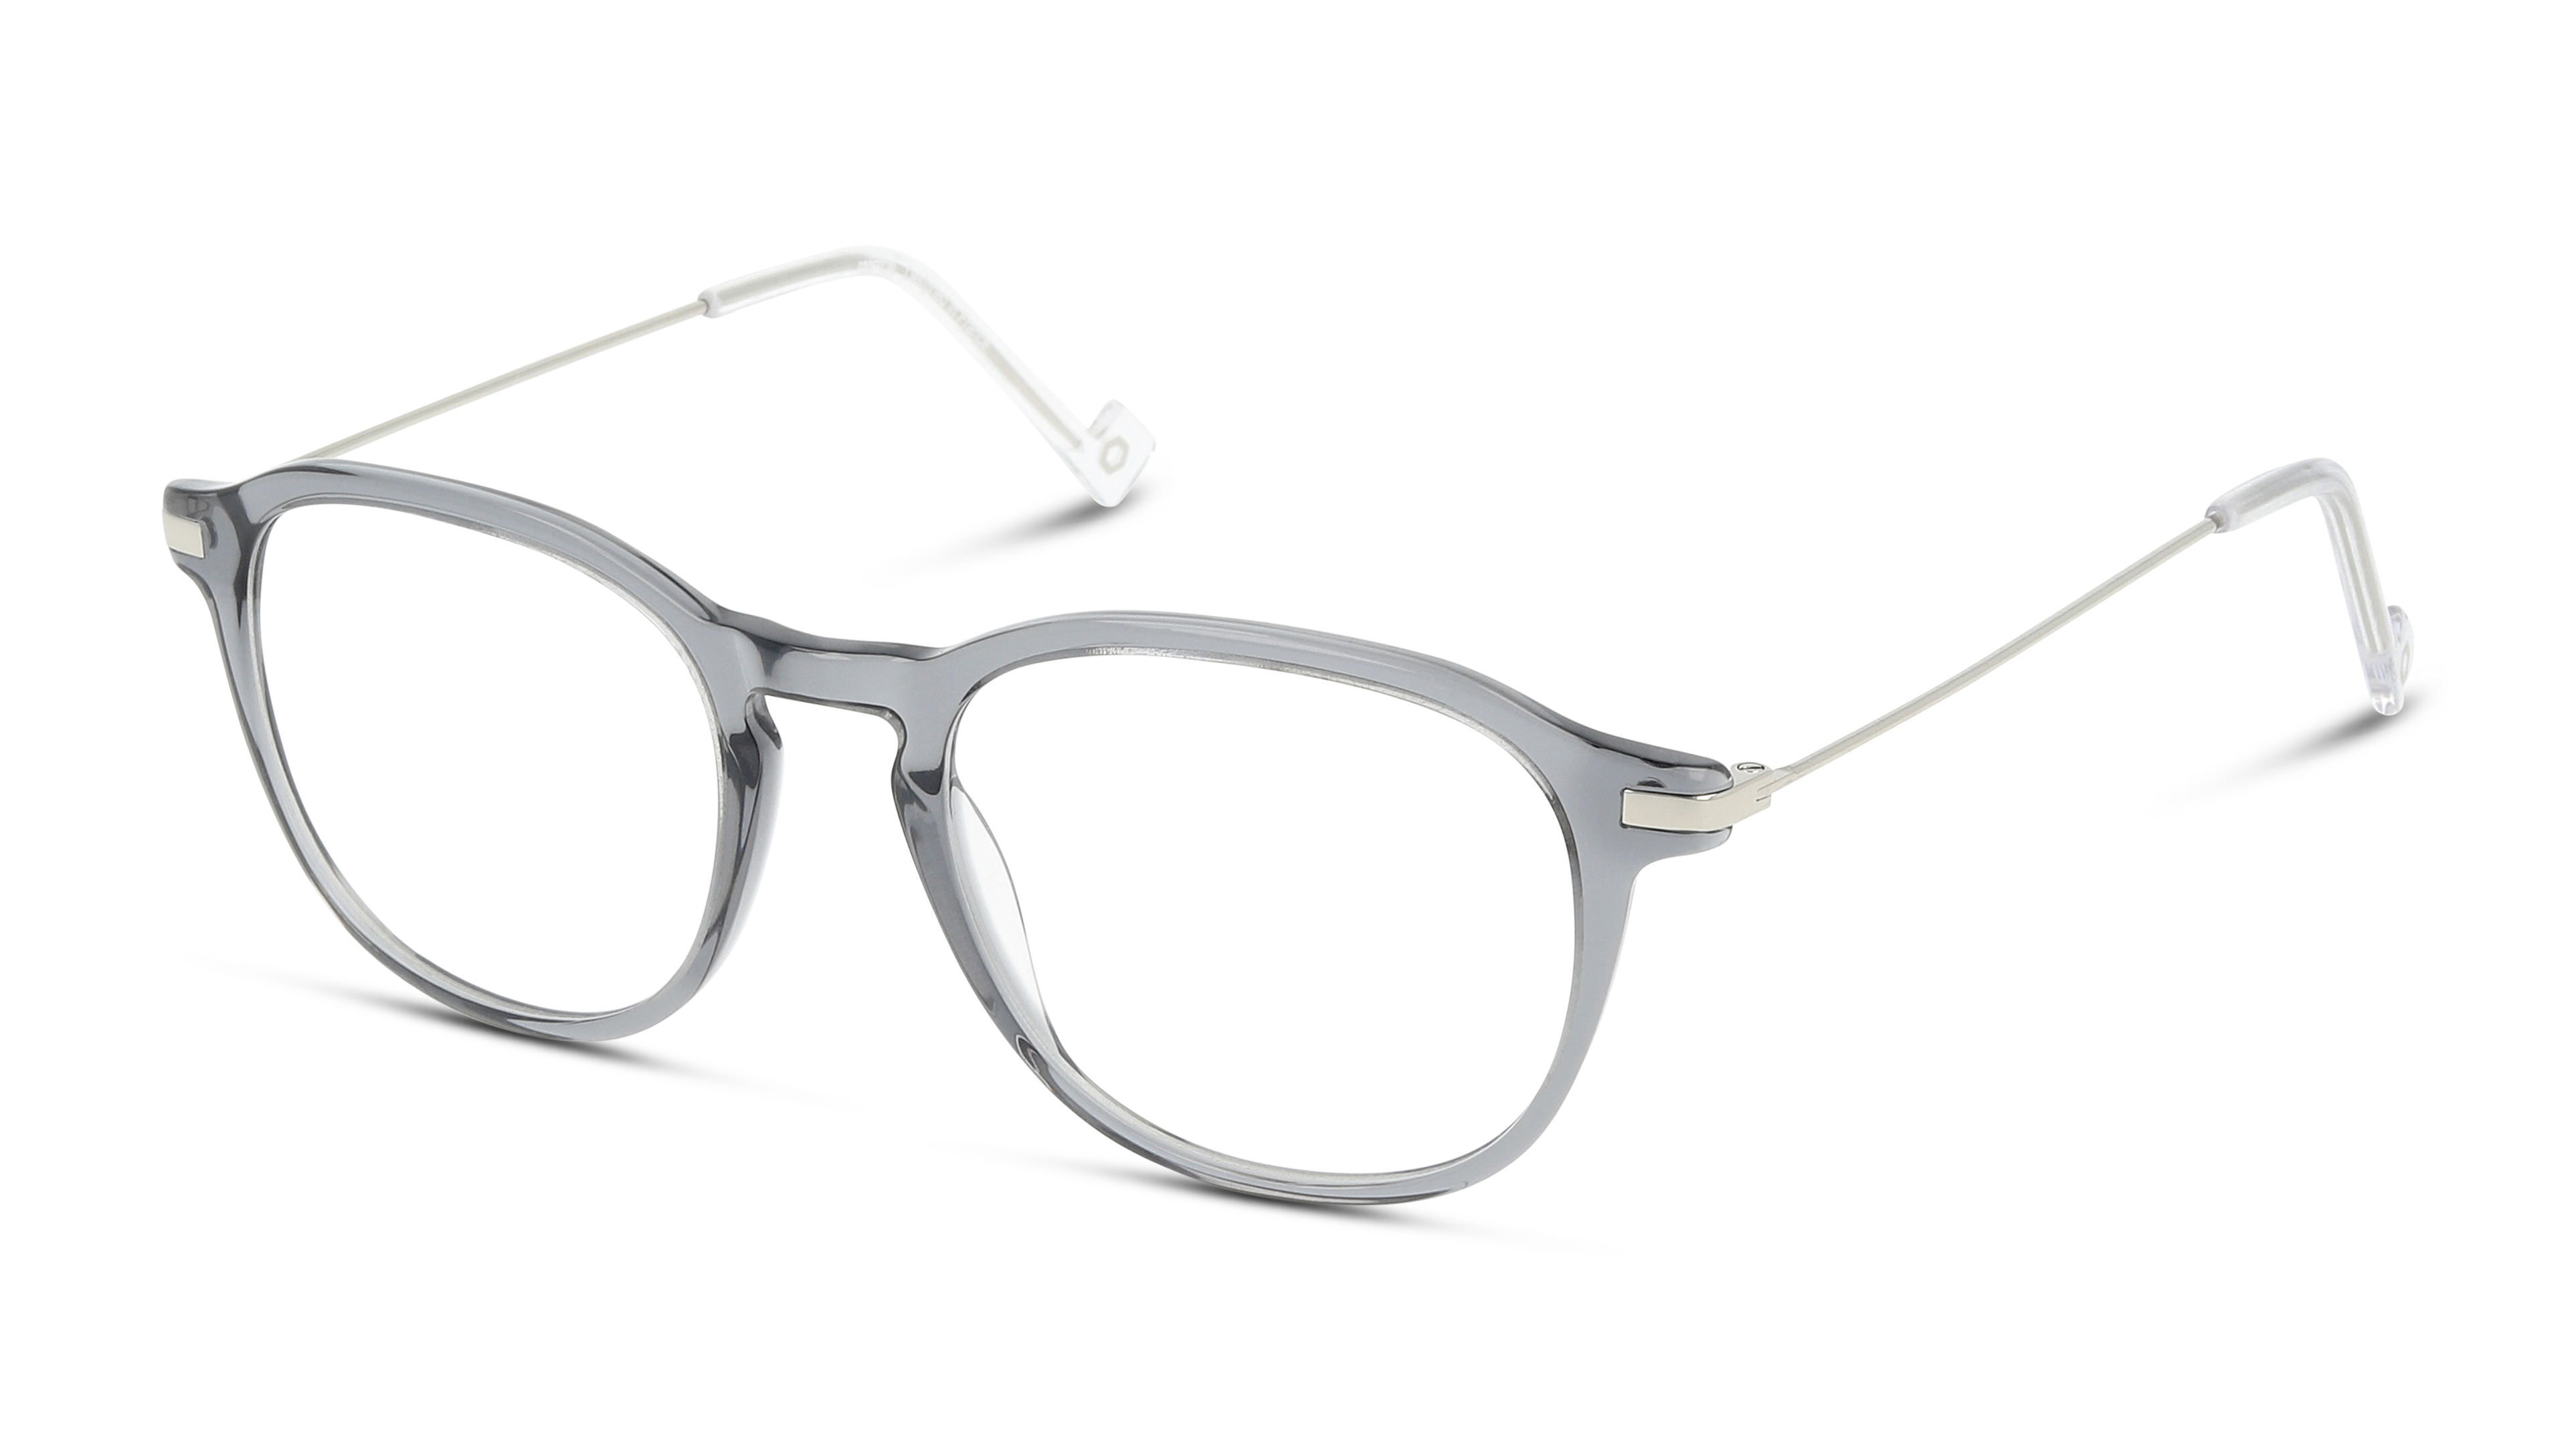 Angle_Left01 Unofficial UNOM0071 (GS00) Glasses Transparent / Grey